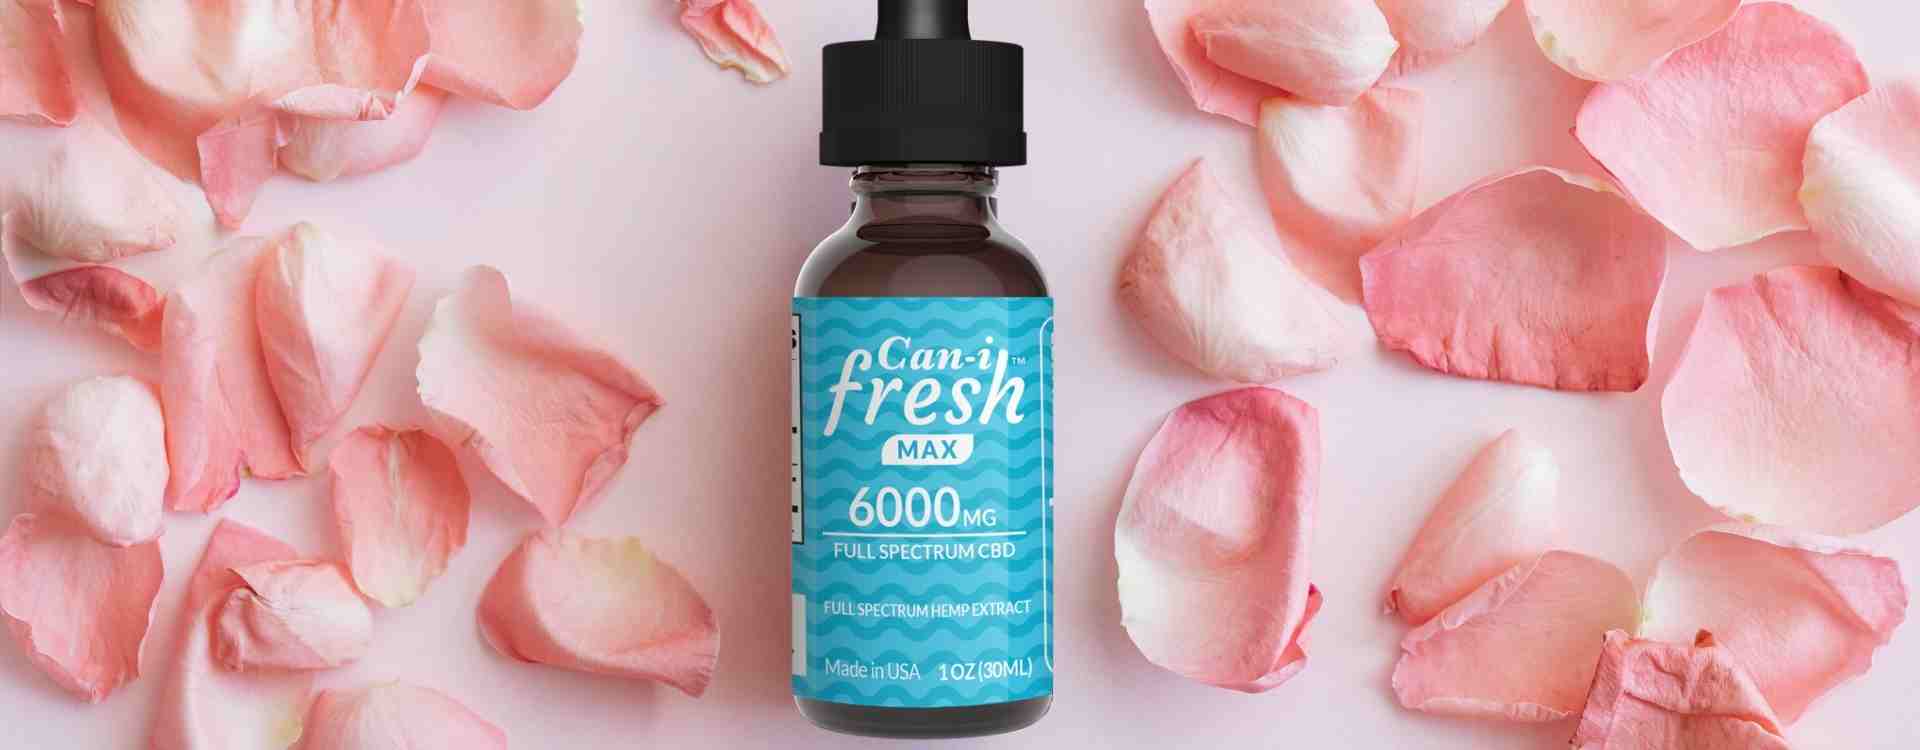 CBD oil tincture for stress relief and relaxation surrounding by pink petals”